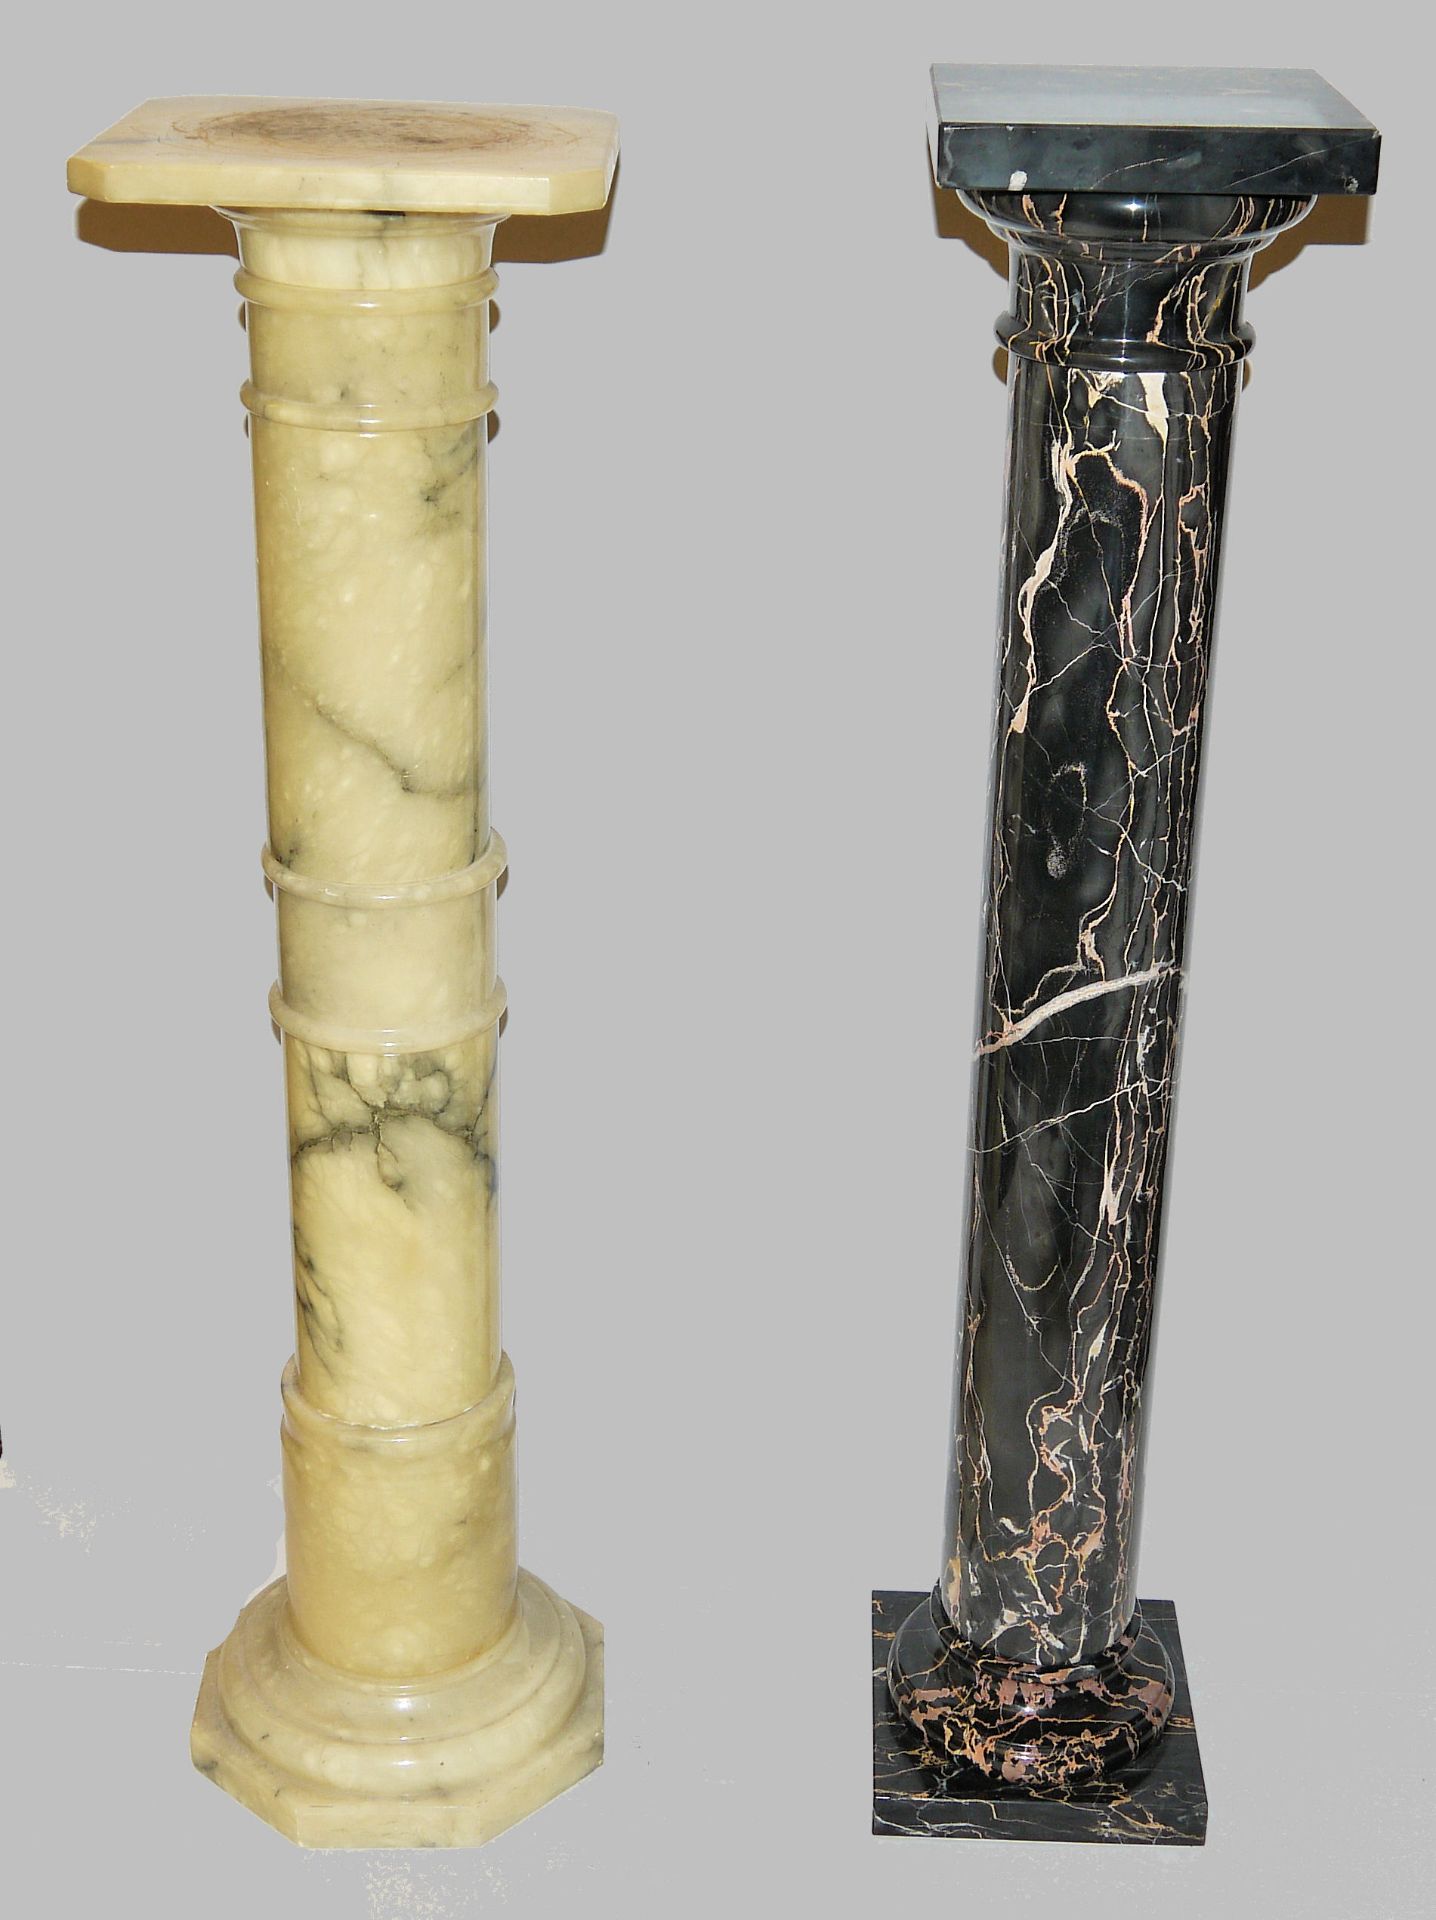 Two column pedestals of marble